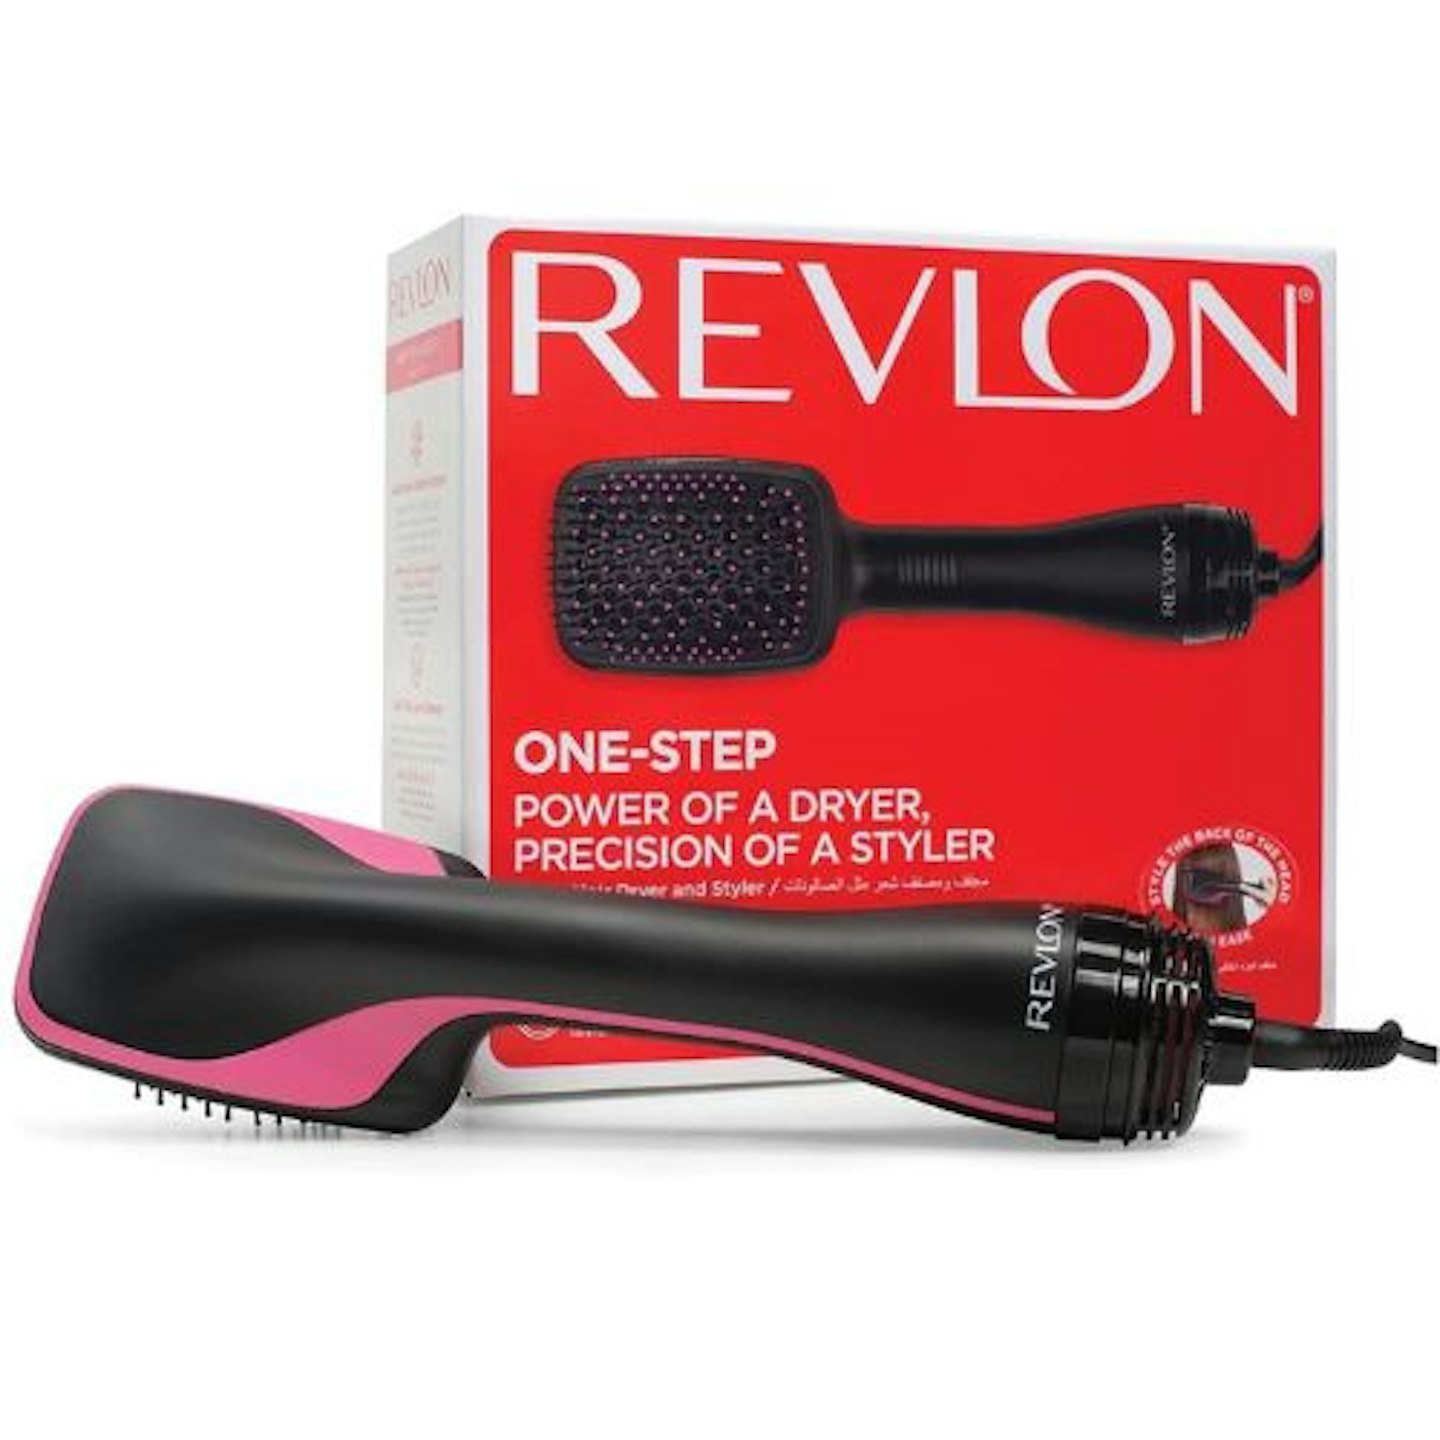 The Viral Revlon Hot Air Brush Has Never Been Cheaper Than Today - CNET